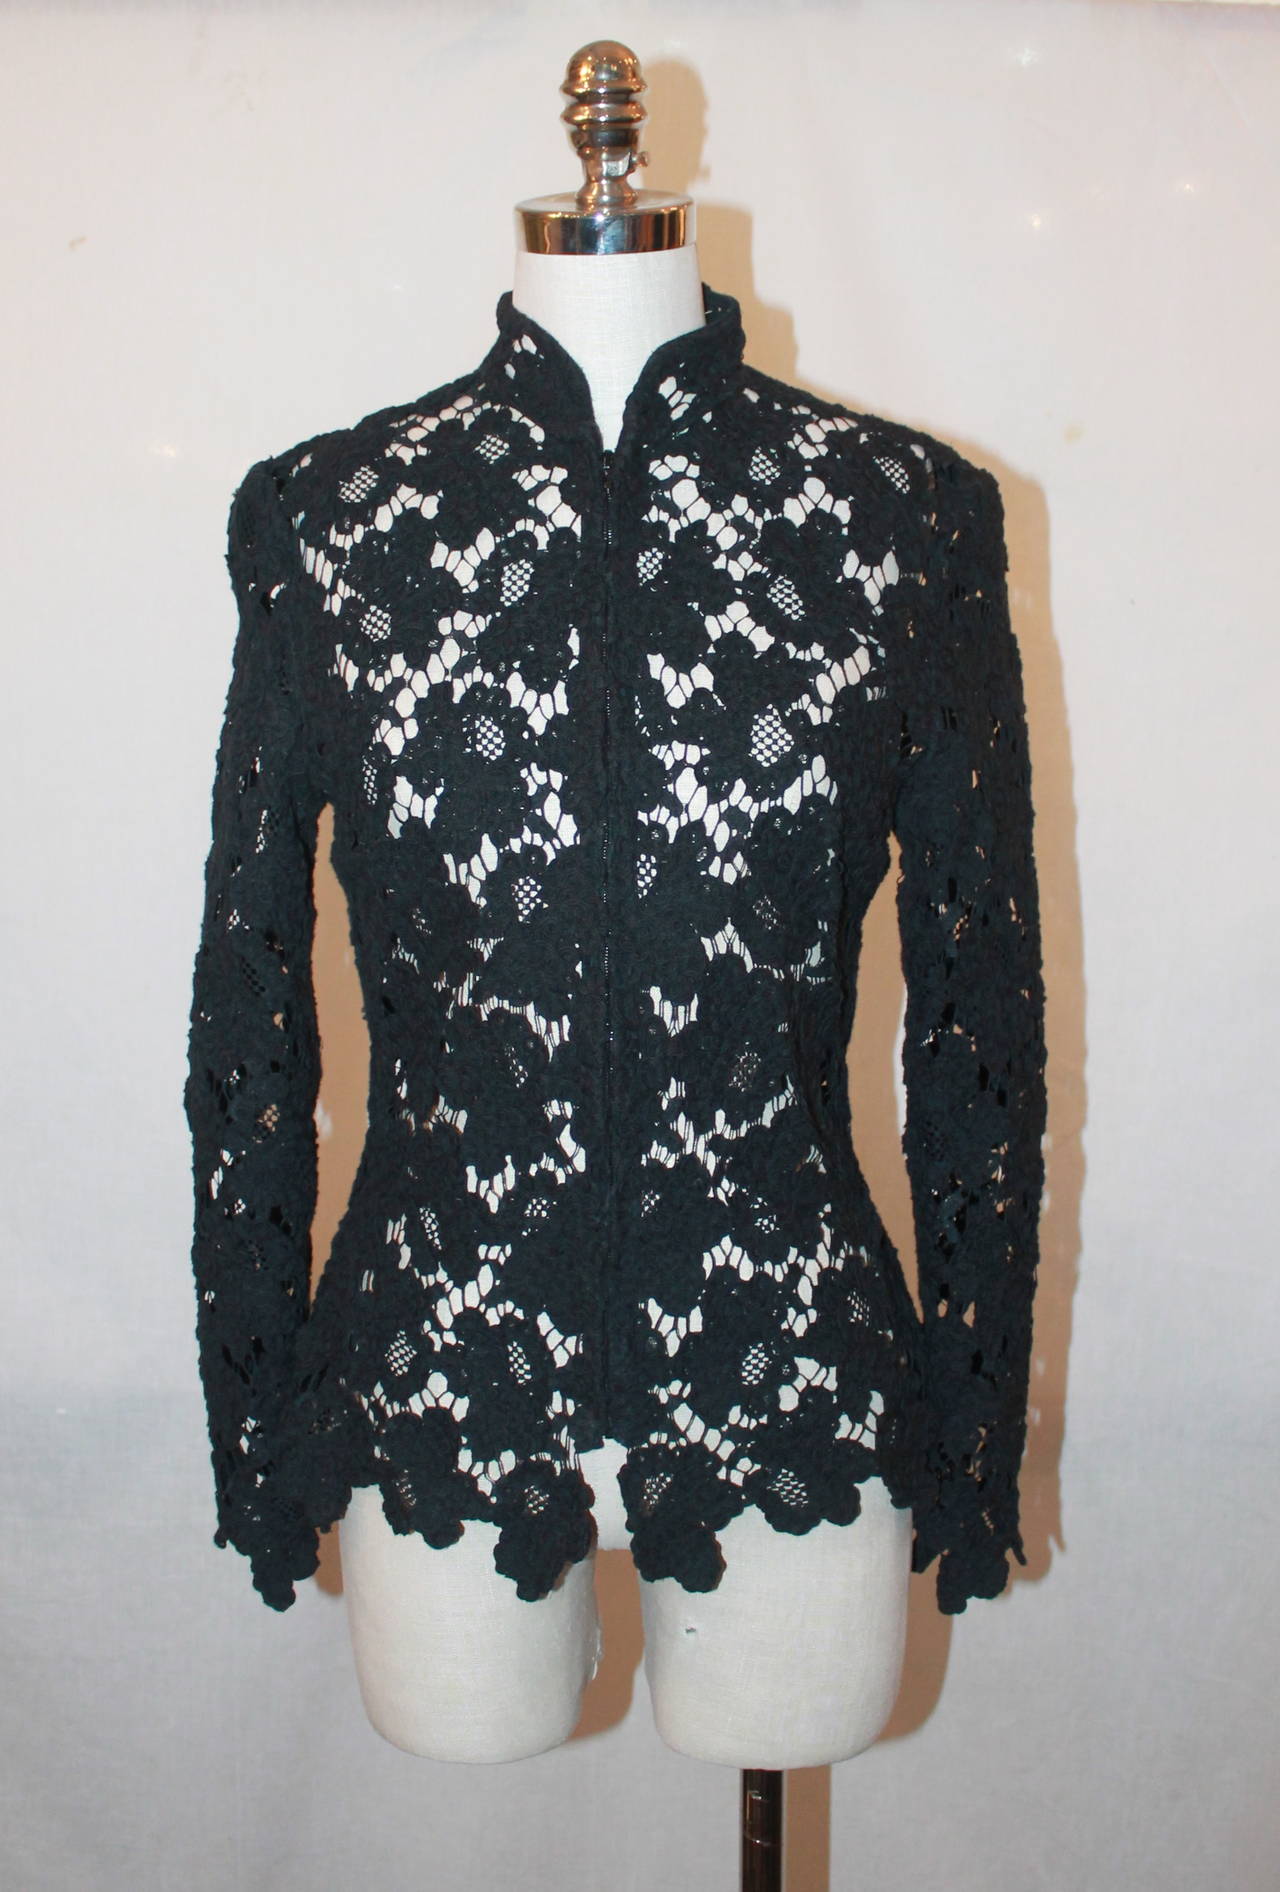 Chanel Black Lace Jacket with White Camelia Bow Tie - 42. This jacket is in excellent condition. The jacket can be worn as a blouse and it zips up. 

Measurements:
Bust- 34